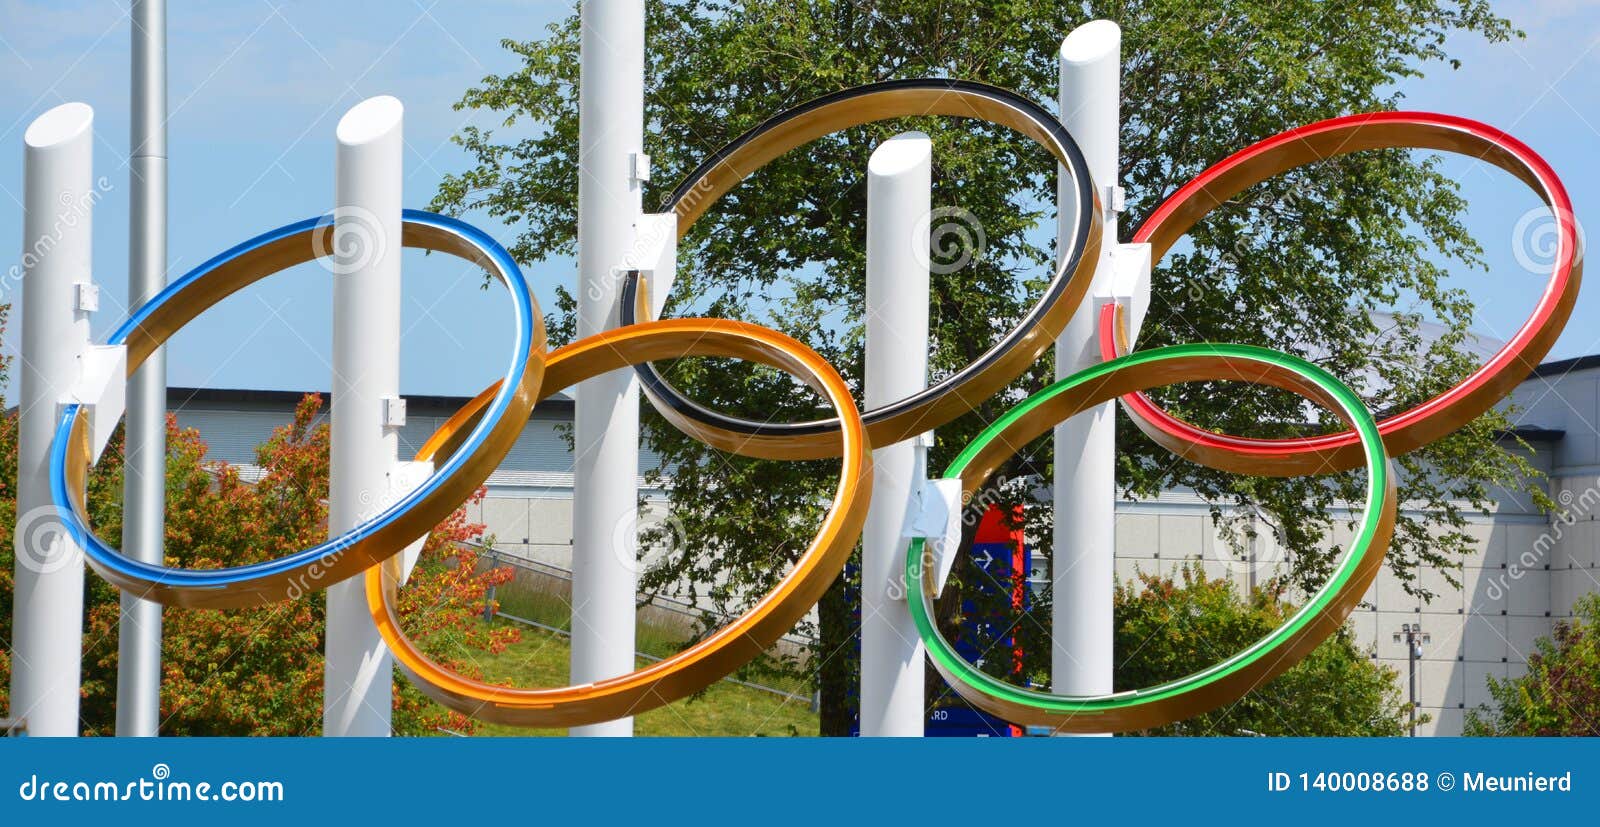 olympic games 2024: Sport enthusiast? Here's all the major sports events  that will take place in 2024 - The Economic Times